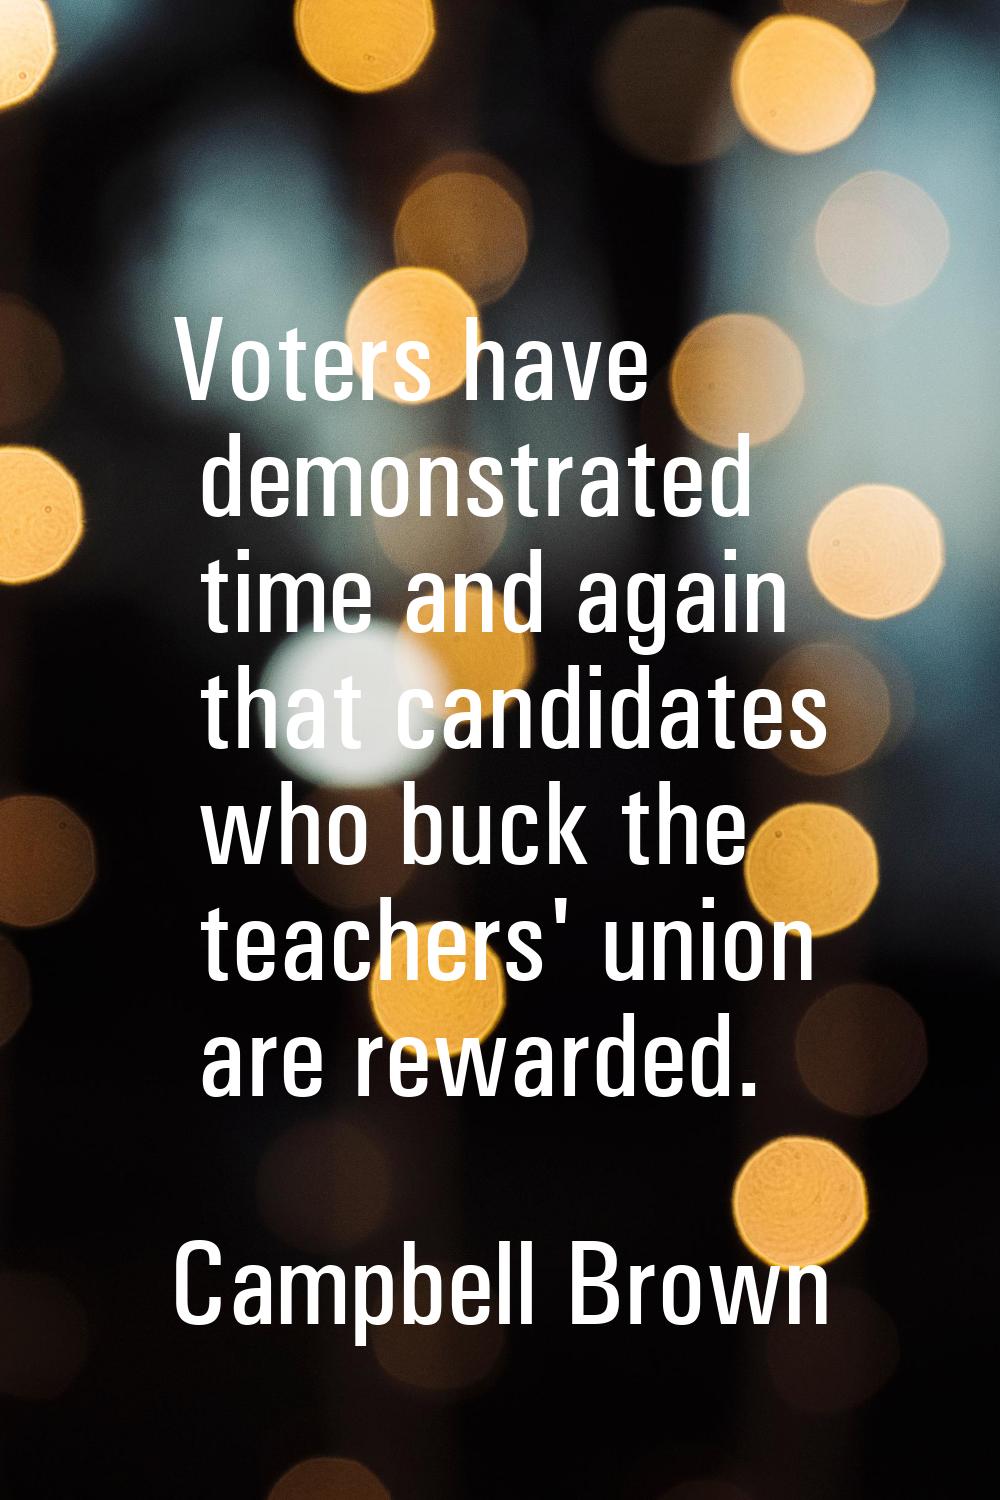 Voters have demonstrated time and again that candidates who buck the teachers' union are rewarded.